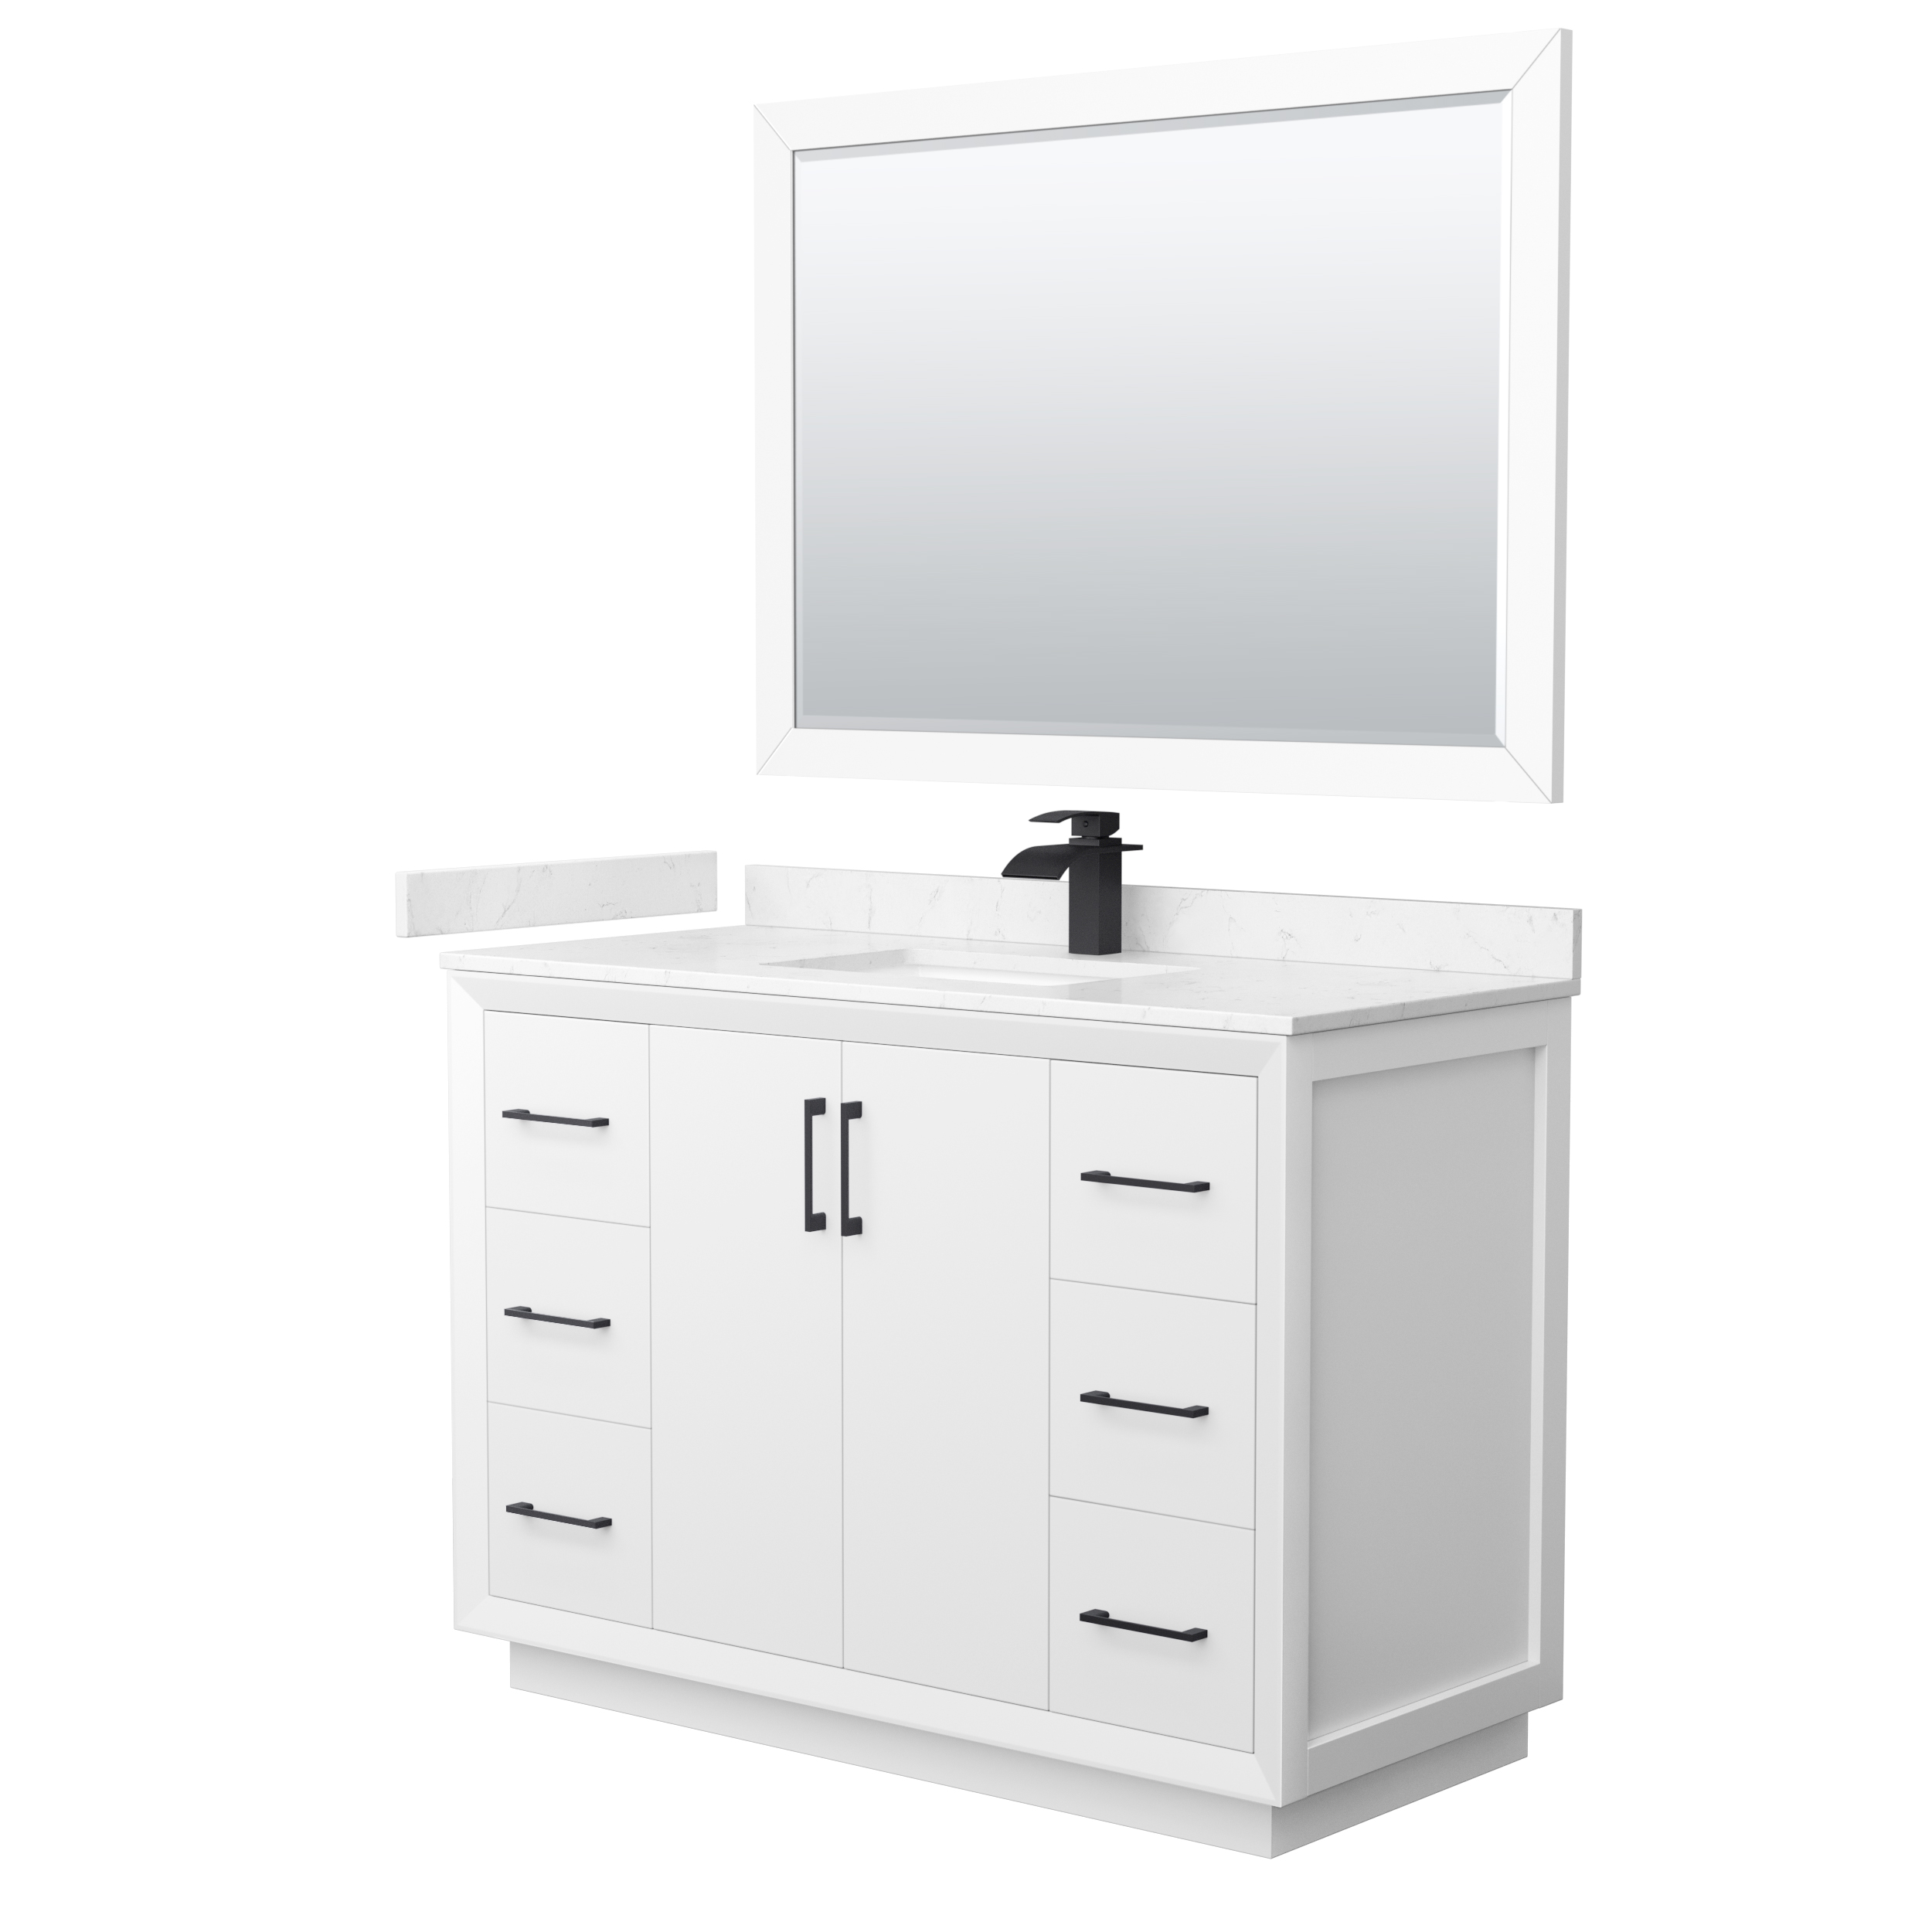 48" Transitional Single Vanity Base in White, 3 Top Options, with 3 Hardware Options and Mirror Option